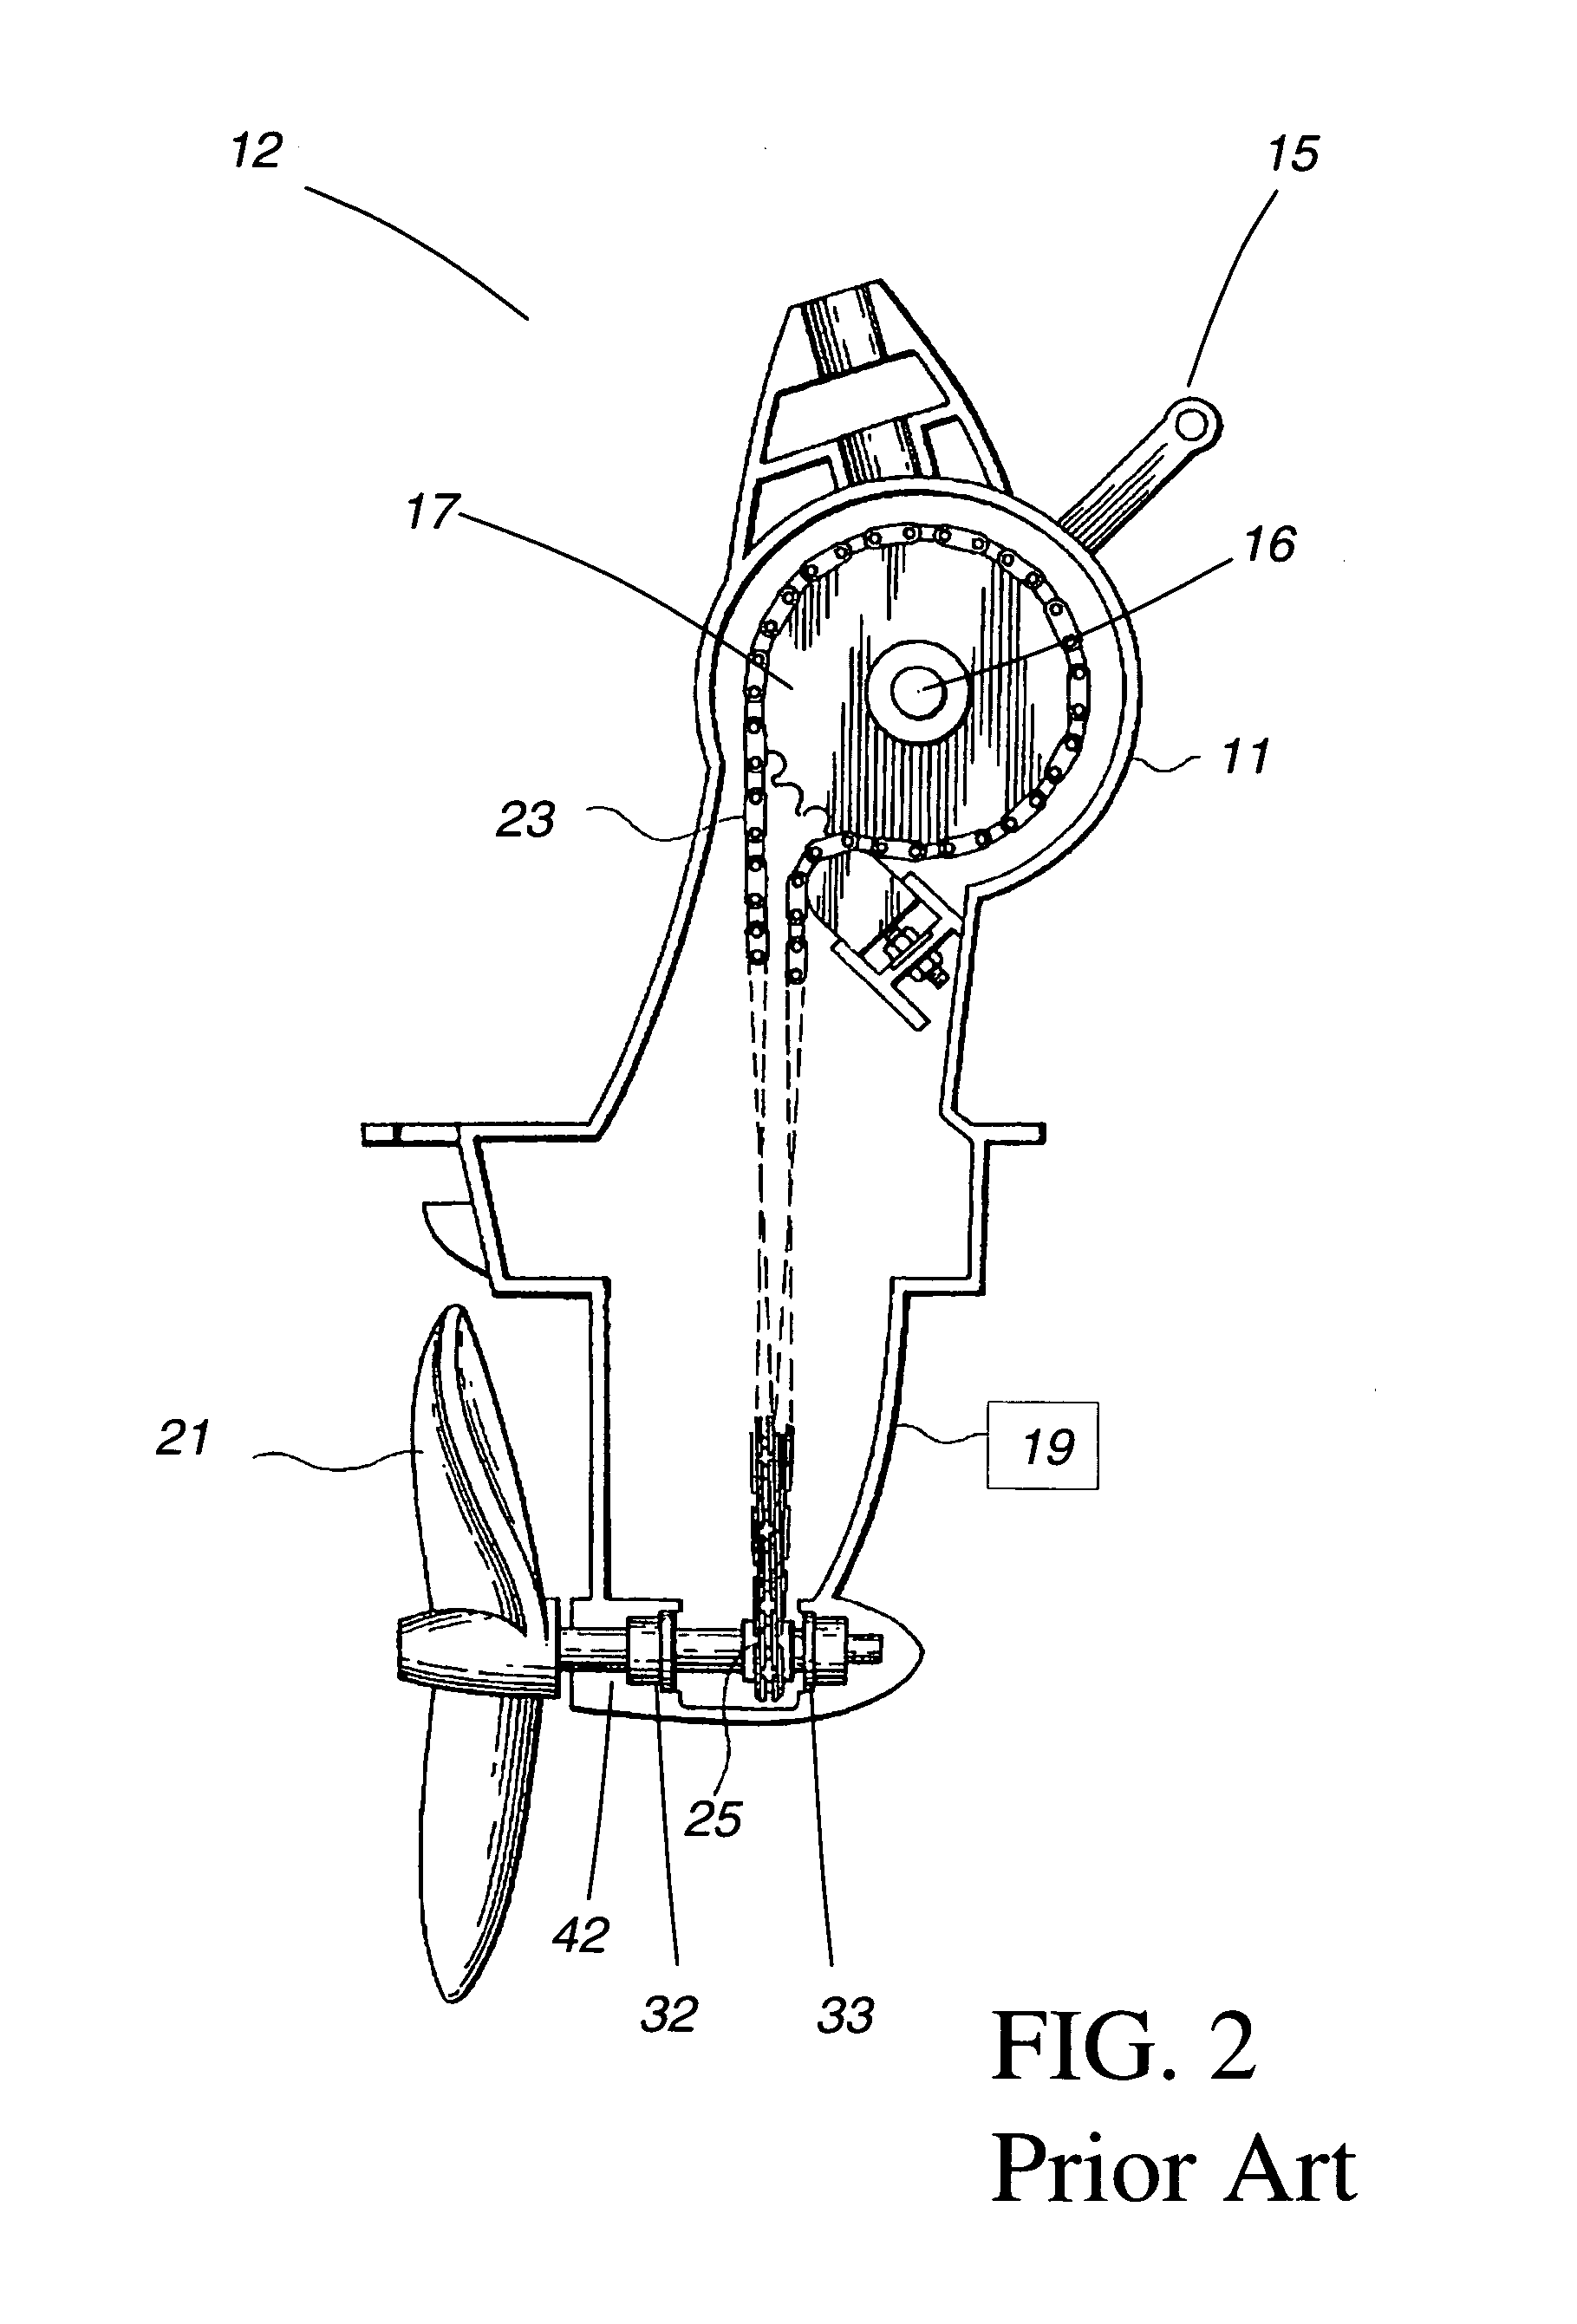 Electric motor assisted propulsion system for human-powered watercraft